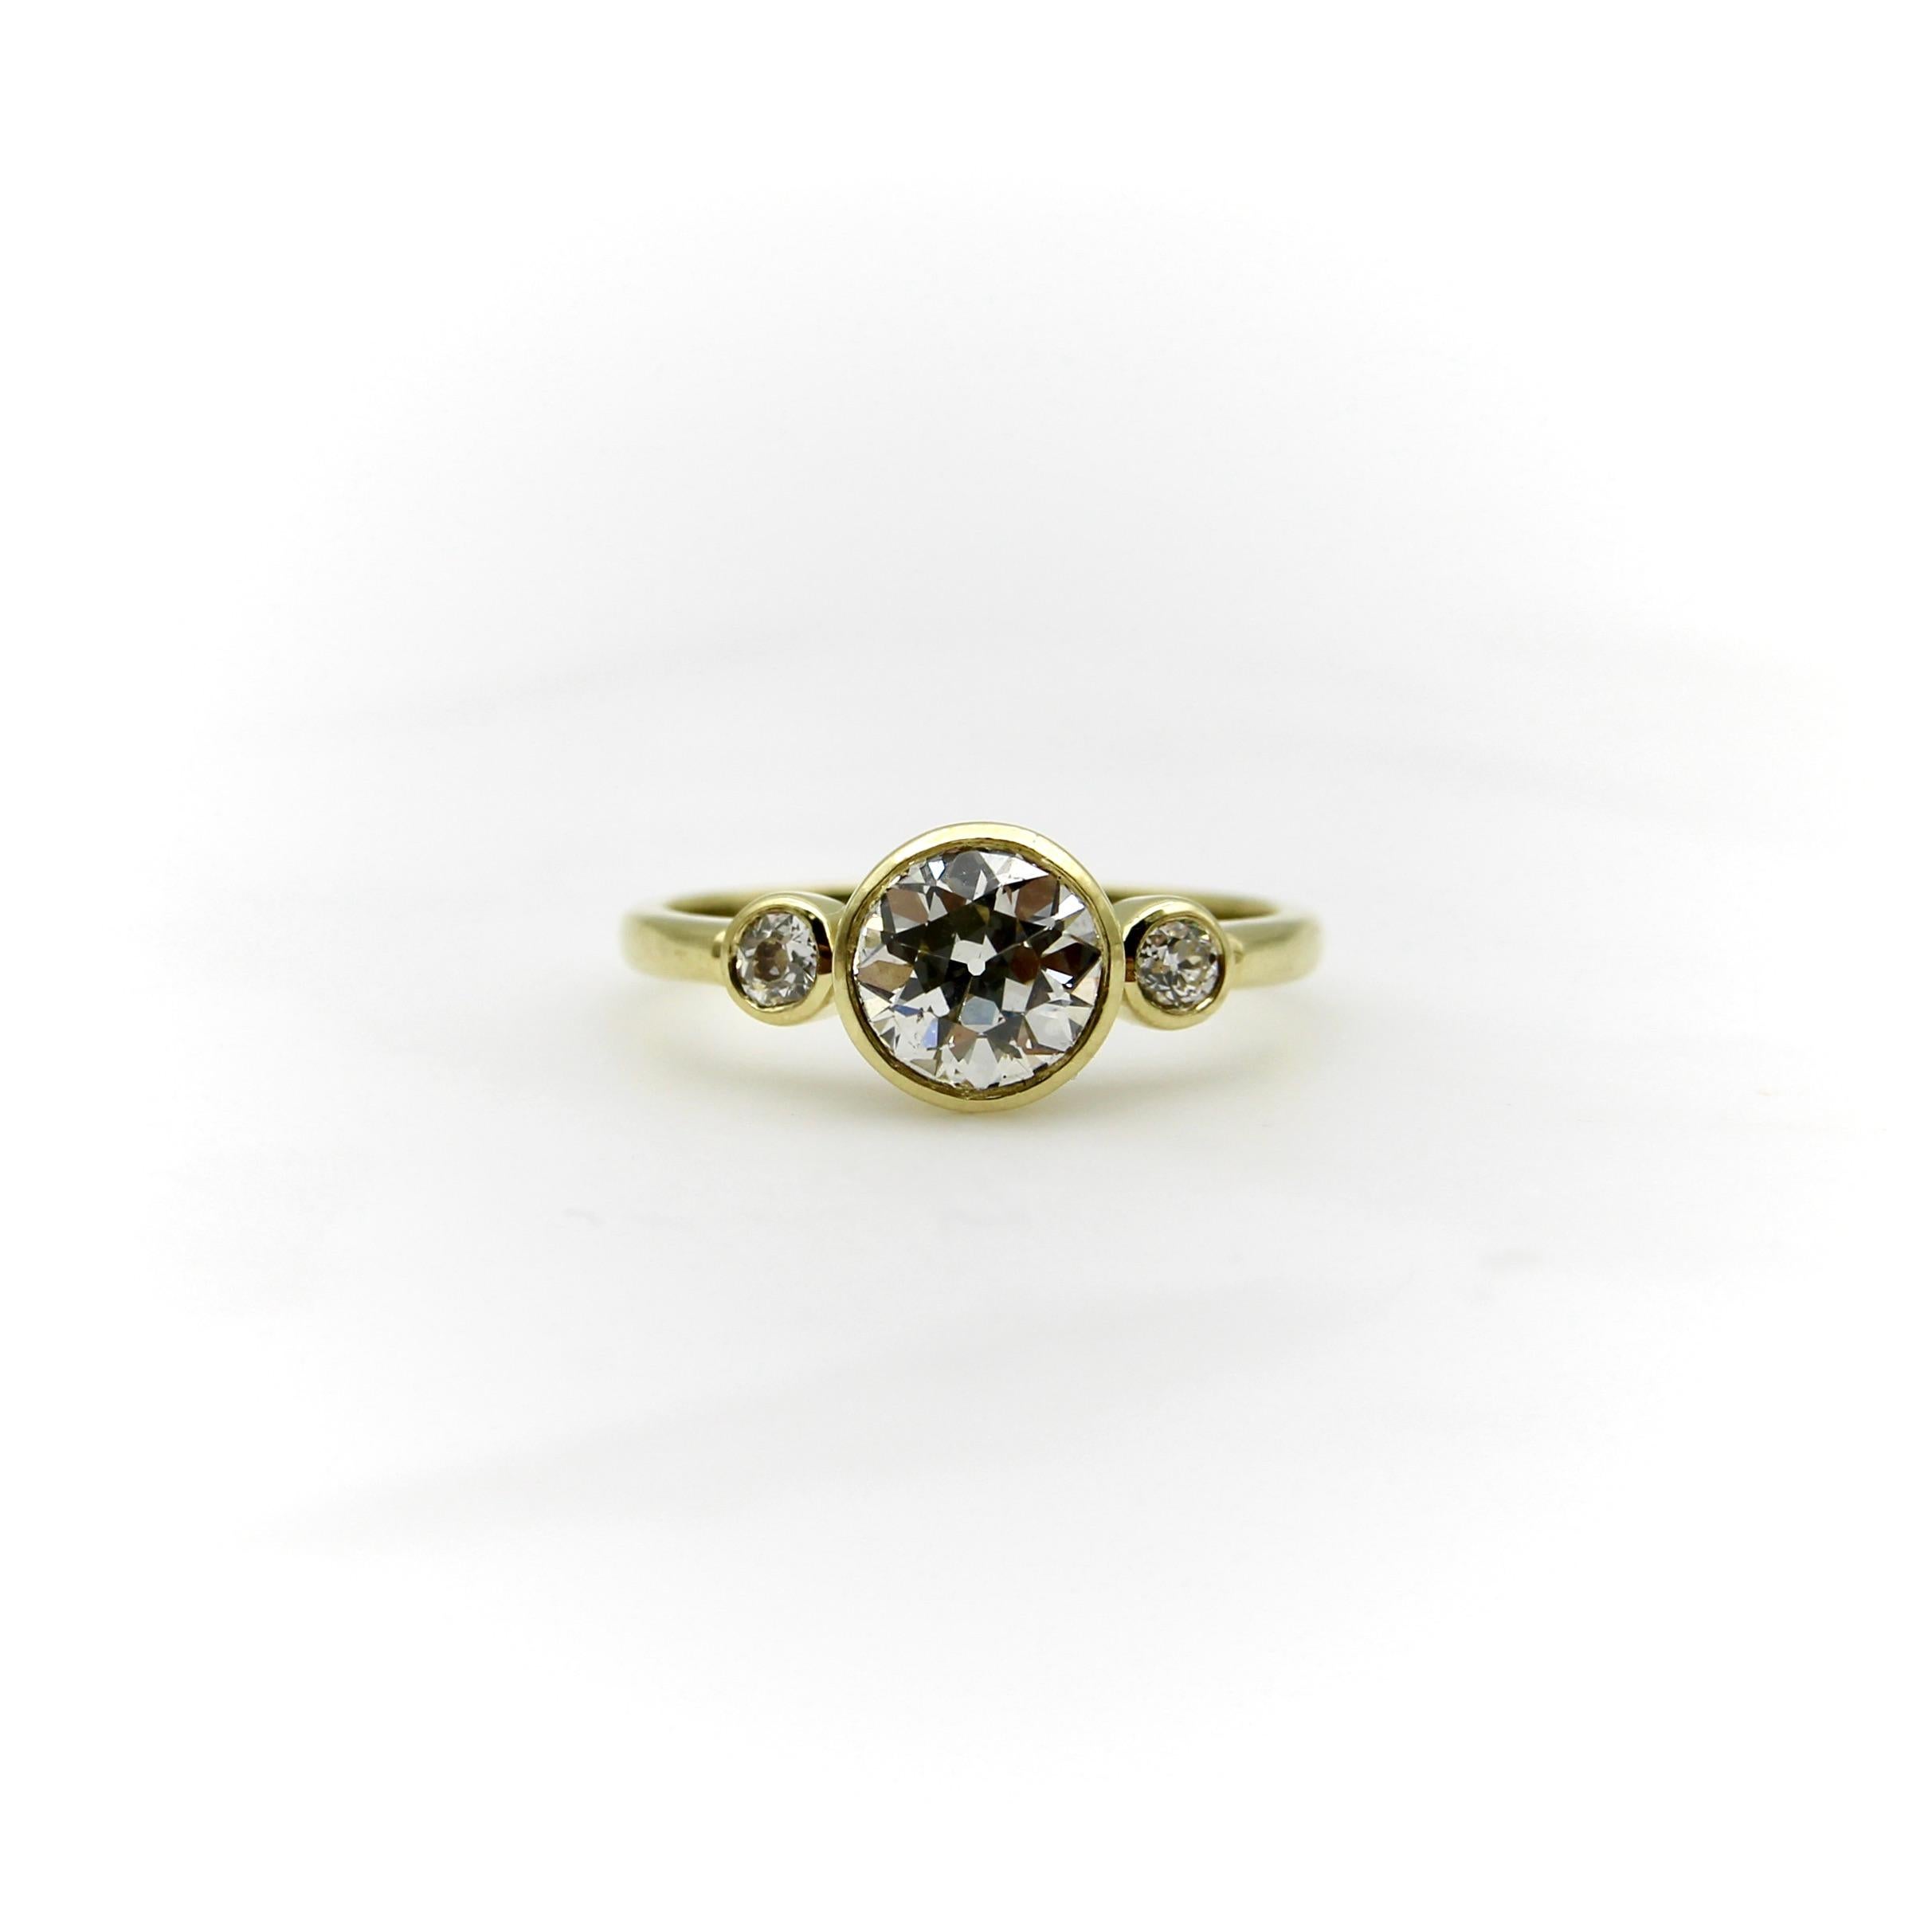 The design for this ring came into being when Kirsten’s Corner replicated a ring for one of our clients. The ring had belonged to her mother, but was damaged past the point of no return, so she wanted to replicate a version of the special piece. The